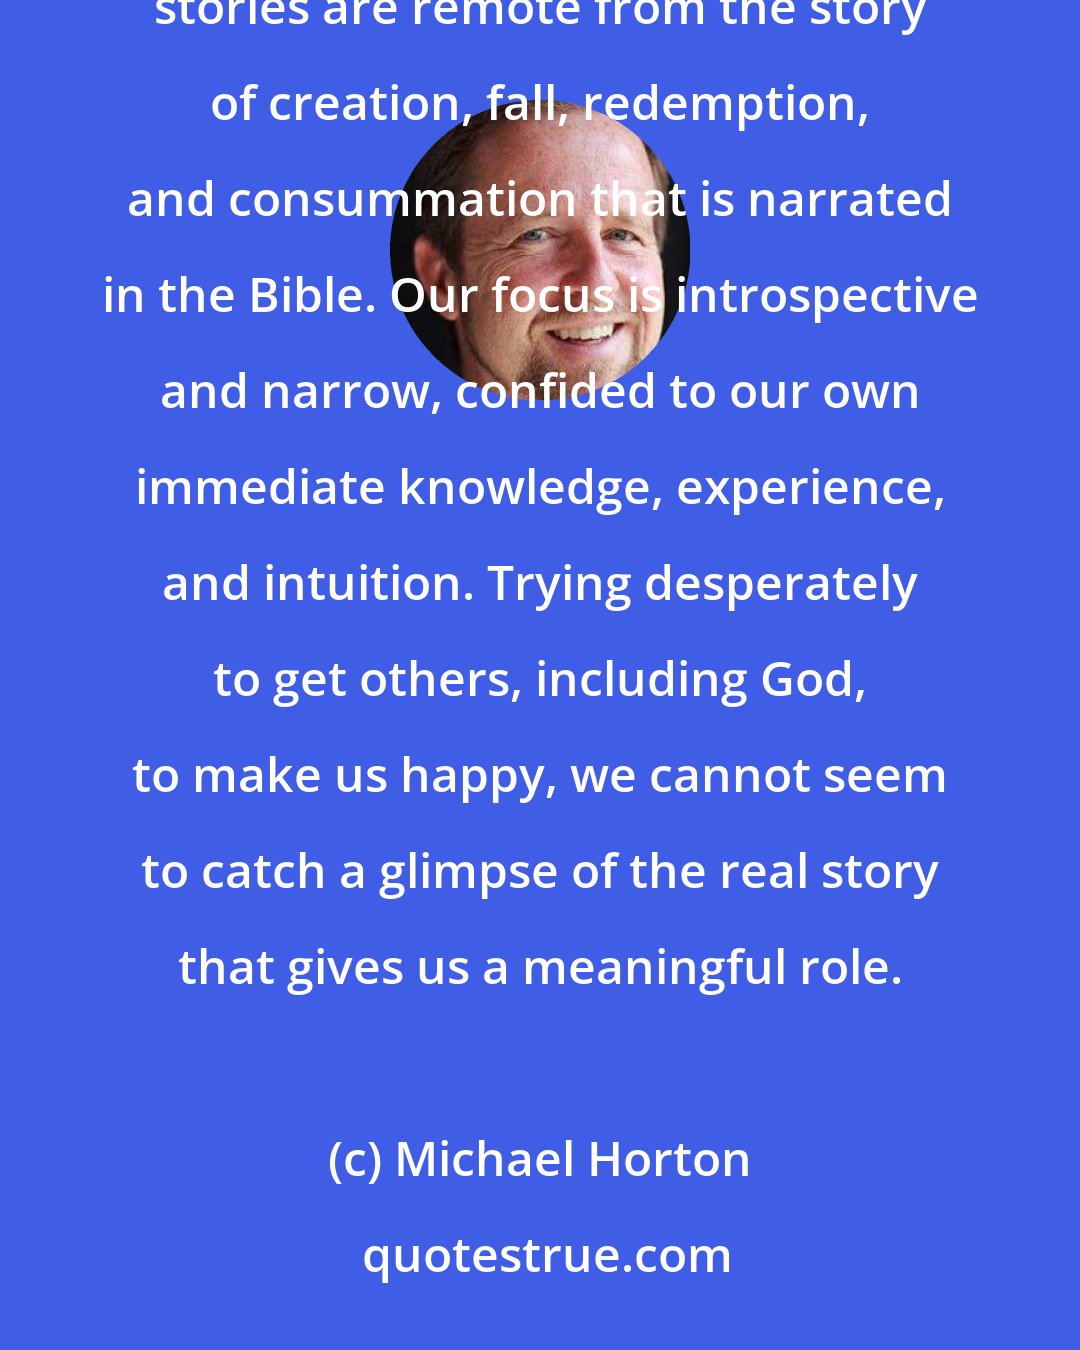 Michael Horton: The gospel is unintelligible to most people today, especially in the West, because their own particular stories are remote from the story of creation, fall, redemption, and consummation that is narrated in the Bible. Our focus is introspective and narrow, confided to our own immediate knowledge, experience, and intuition. Trying desperately to get others, including God, to make us happy, we cannot seem to catch a glimpse of the real story that gives us a meaningful role.